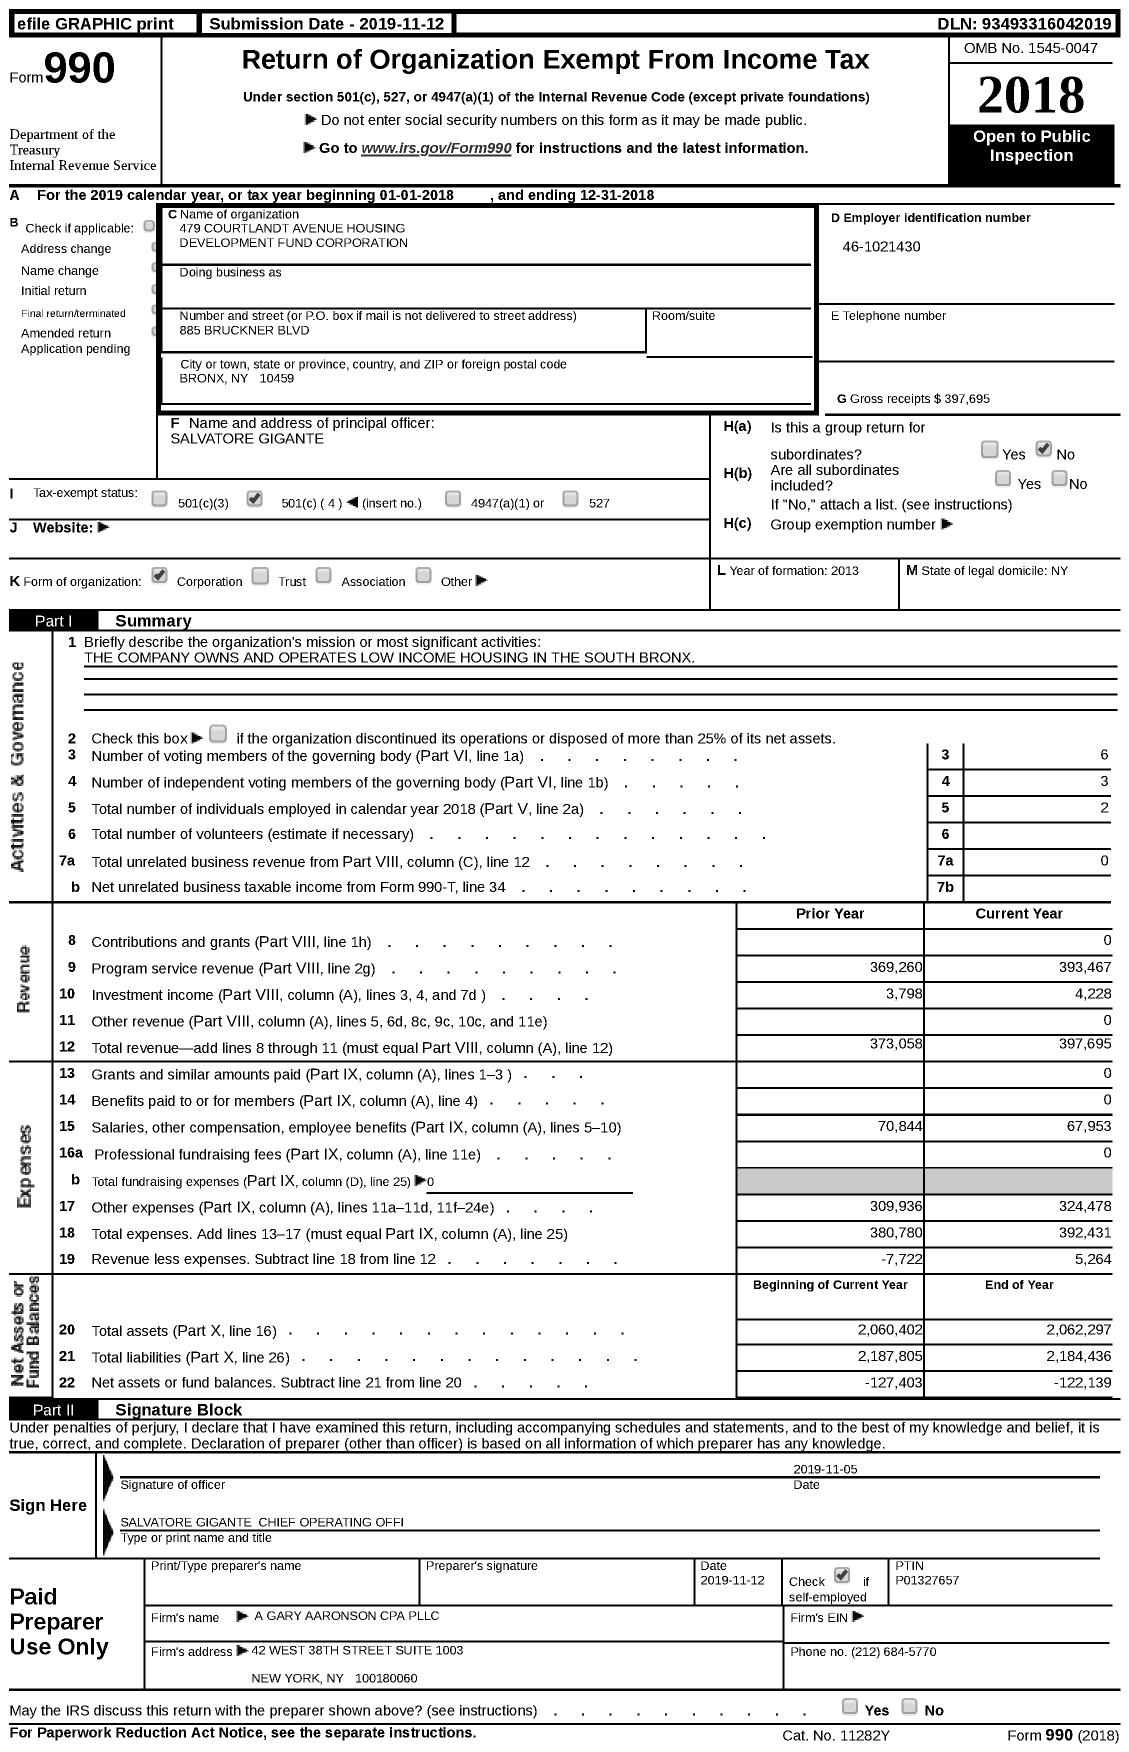 Image of first page of 2018 Form 990 for 479 Courtlandt Avenue Housing Development Fund Corporation